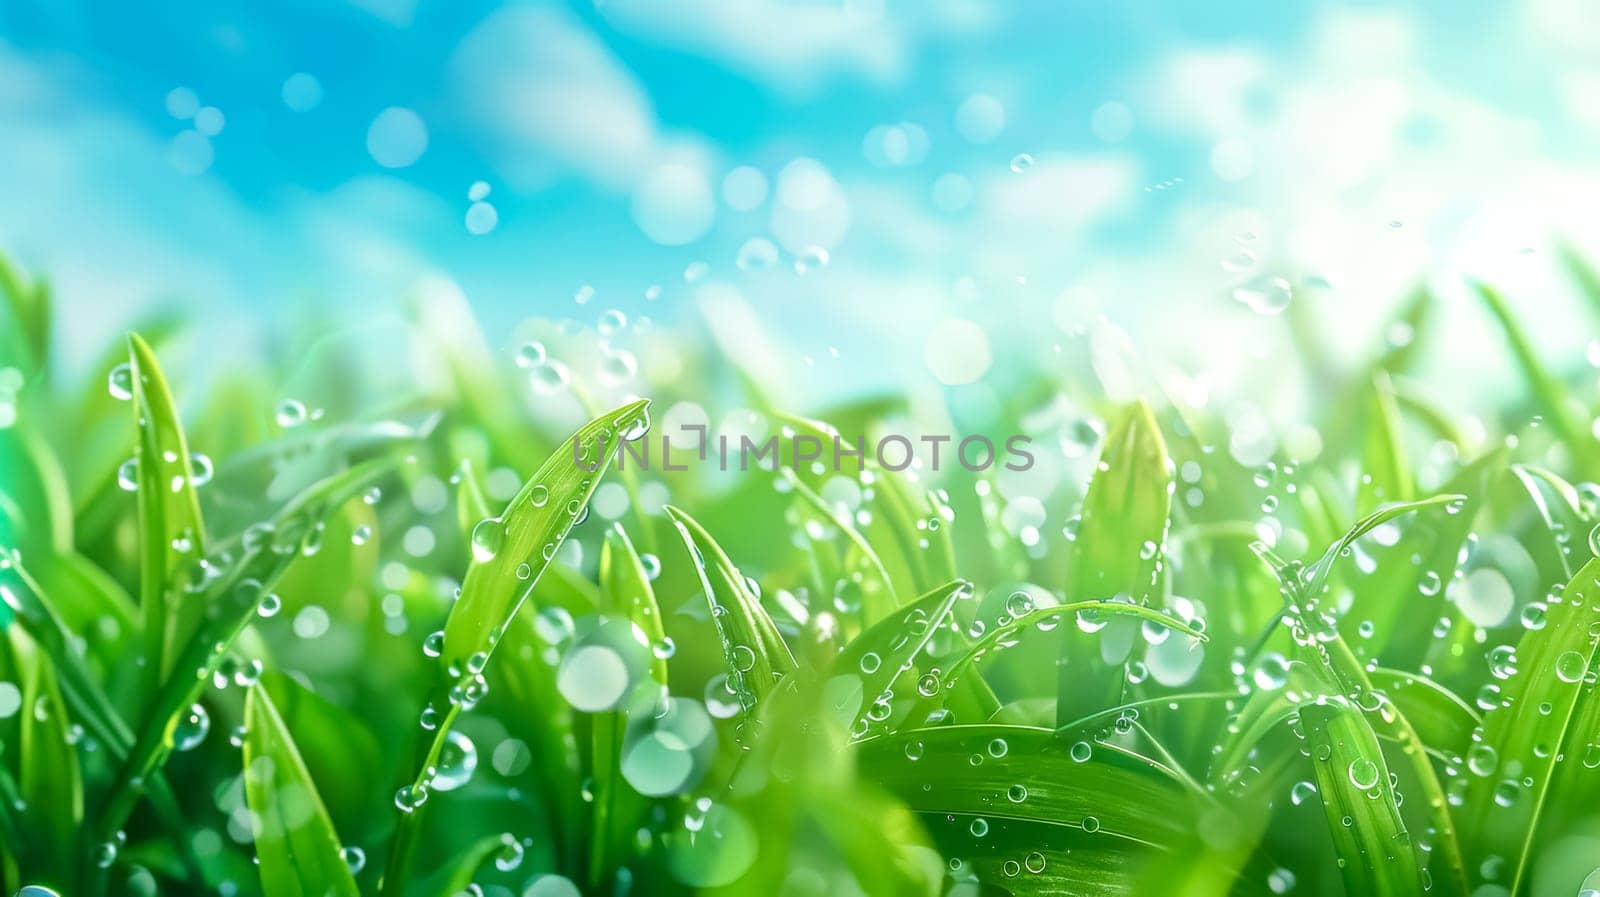 Close-up of water droplets on vibrant green grass with a bright, blue sky in the background